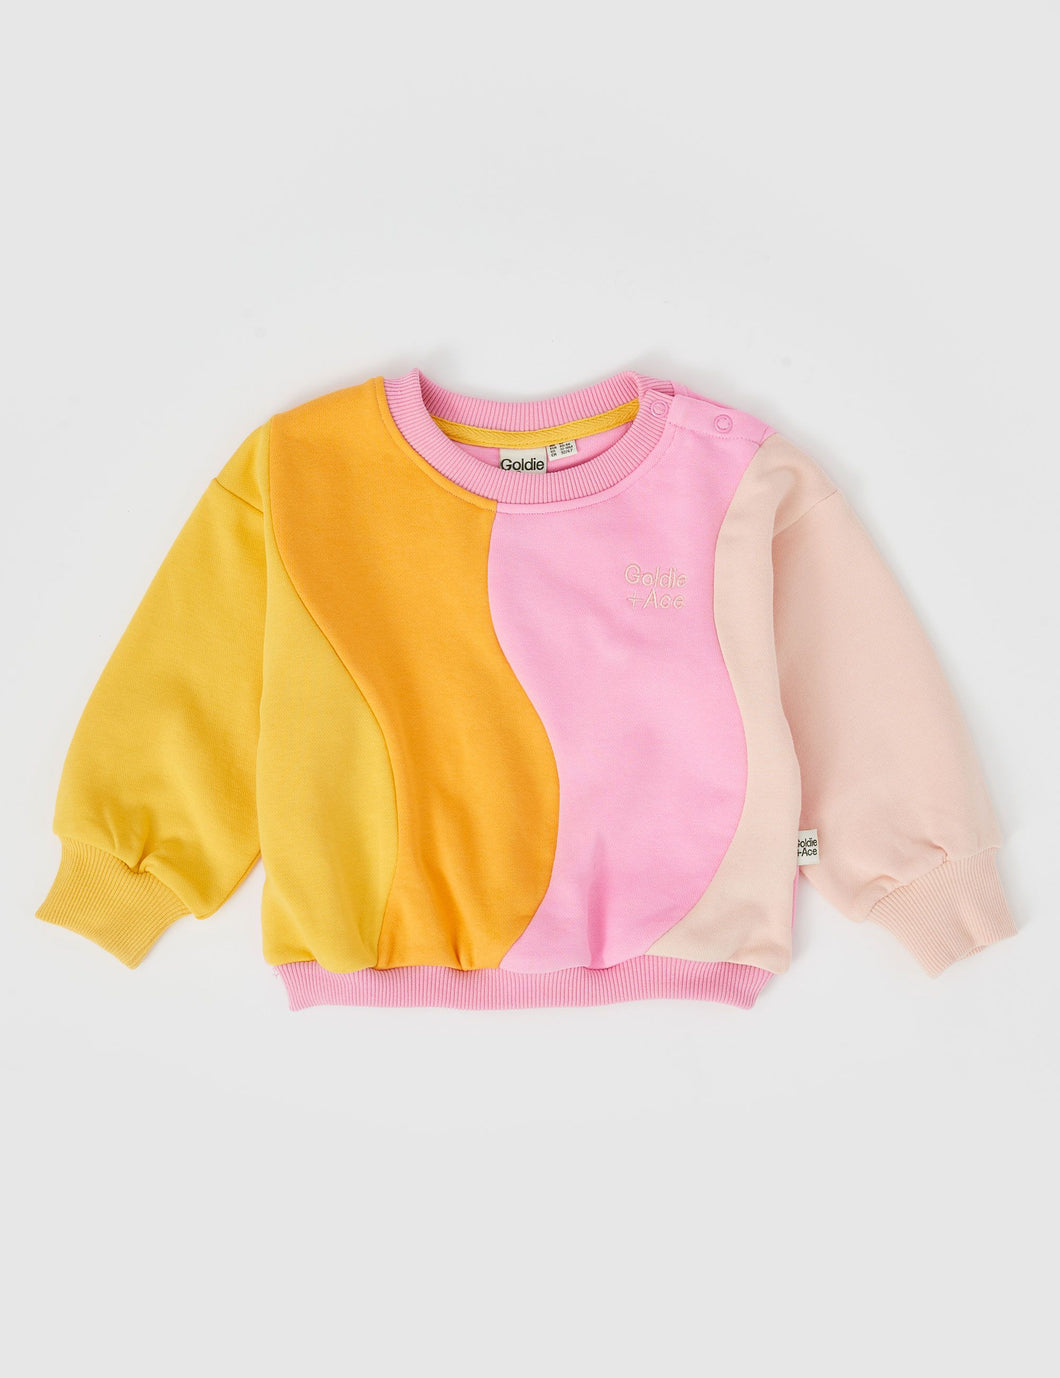 Rio Wave Sweater - Pink/Gold